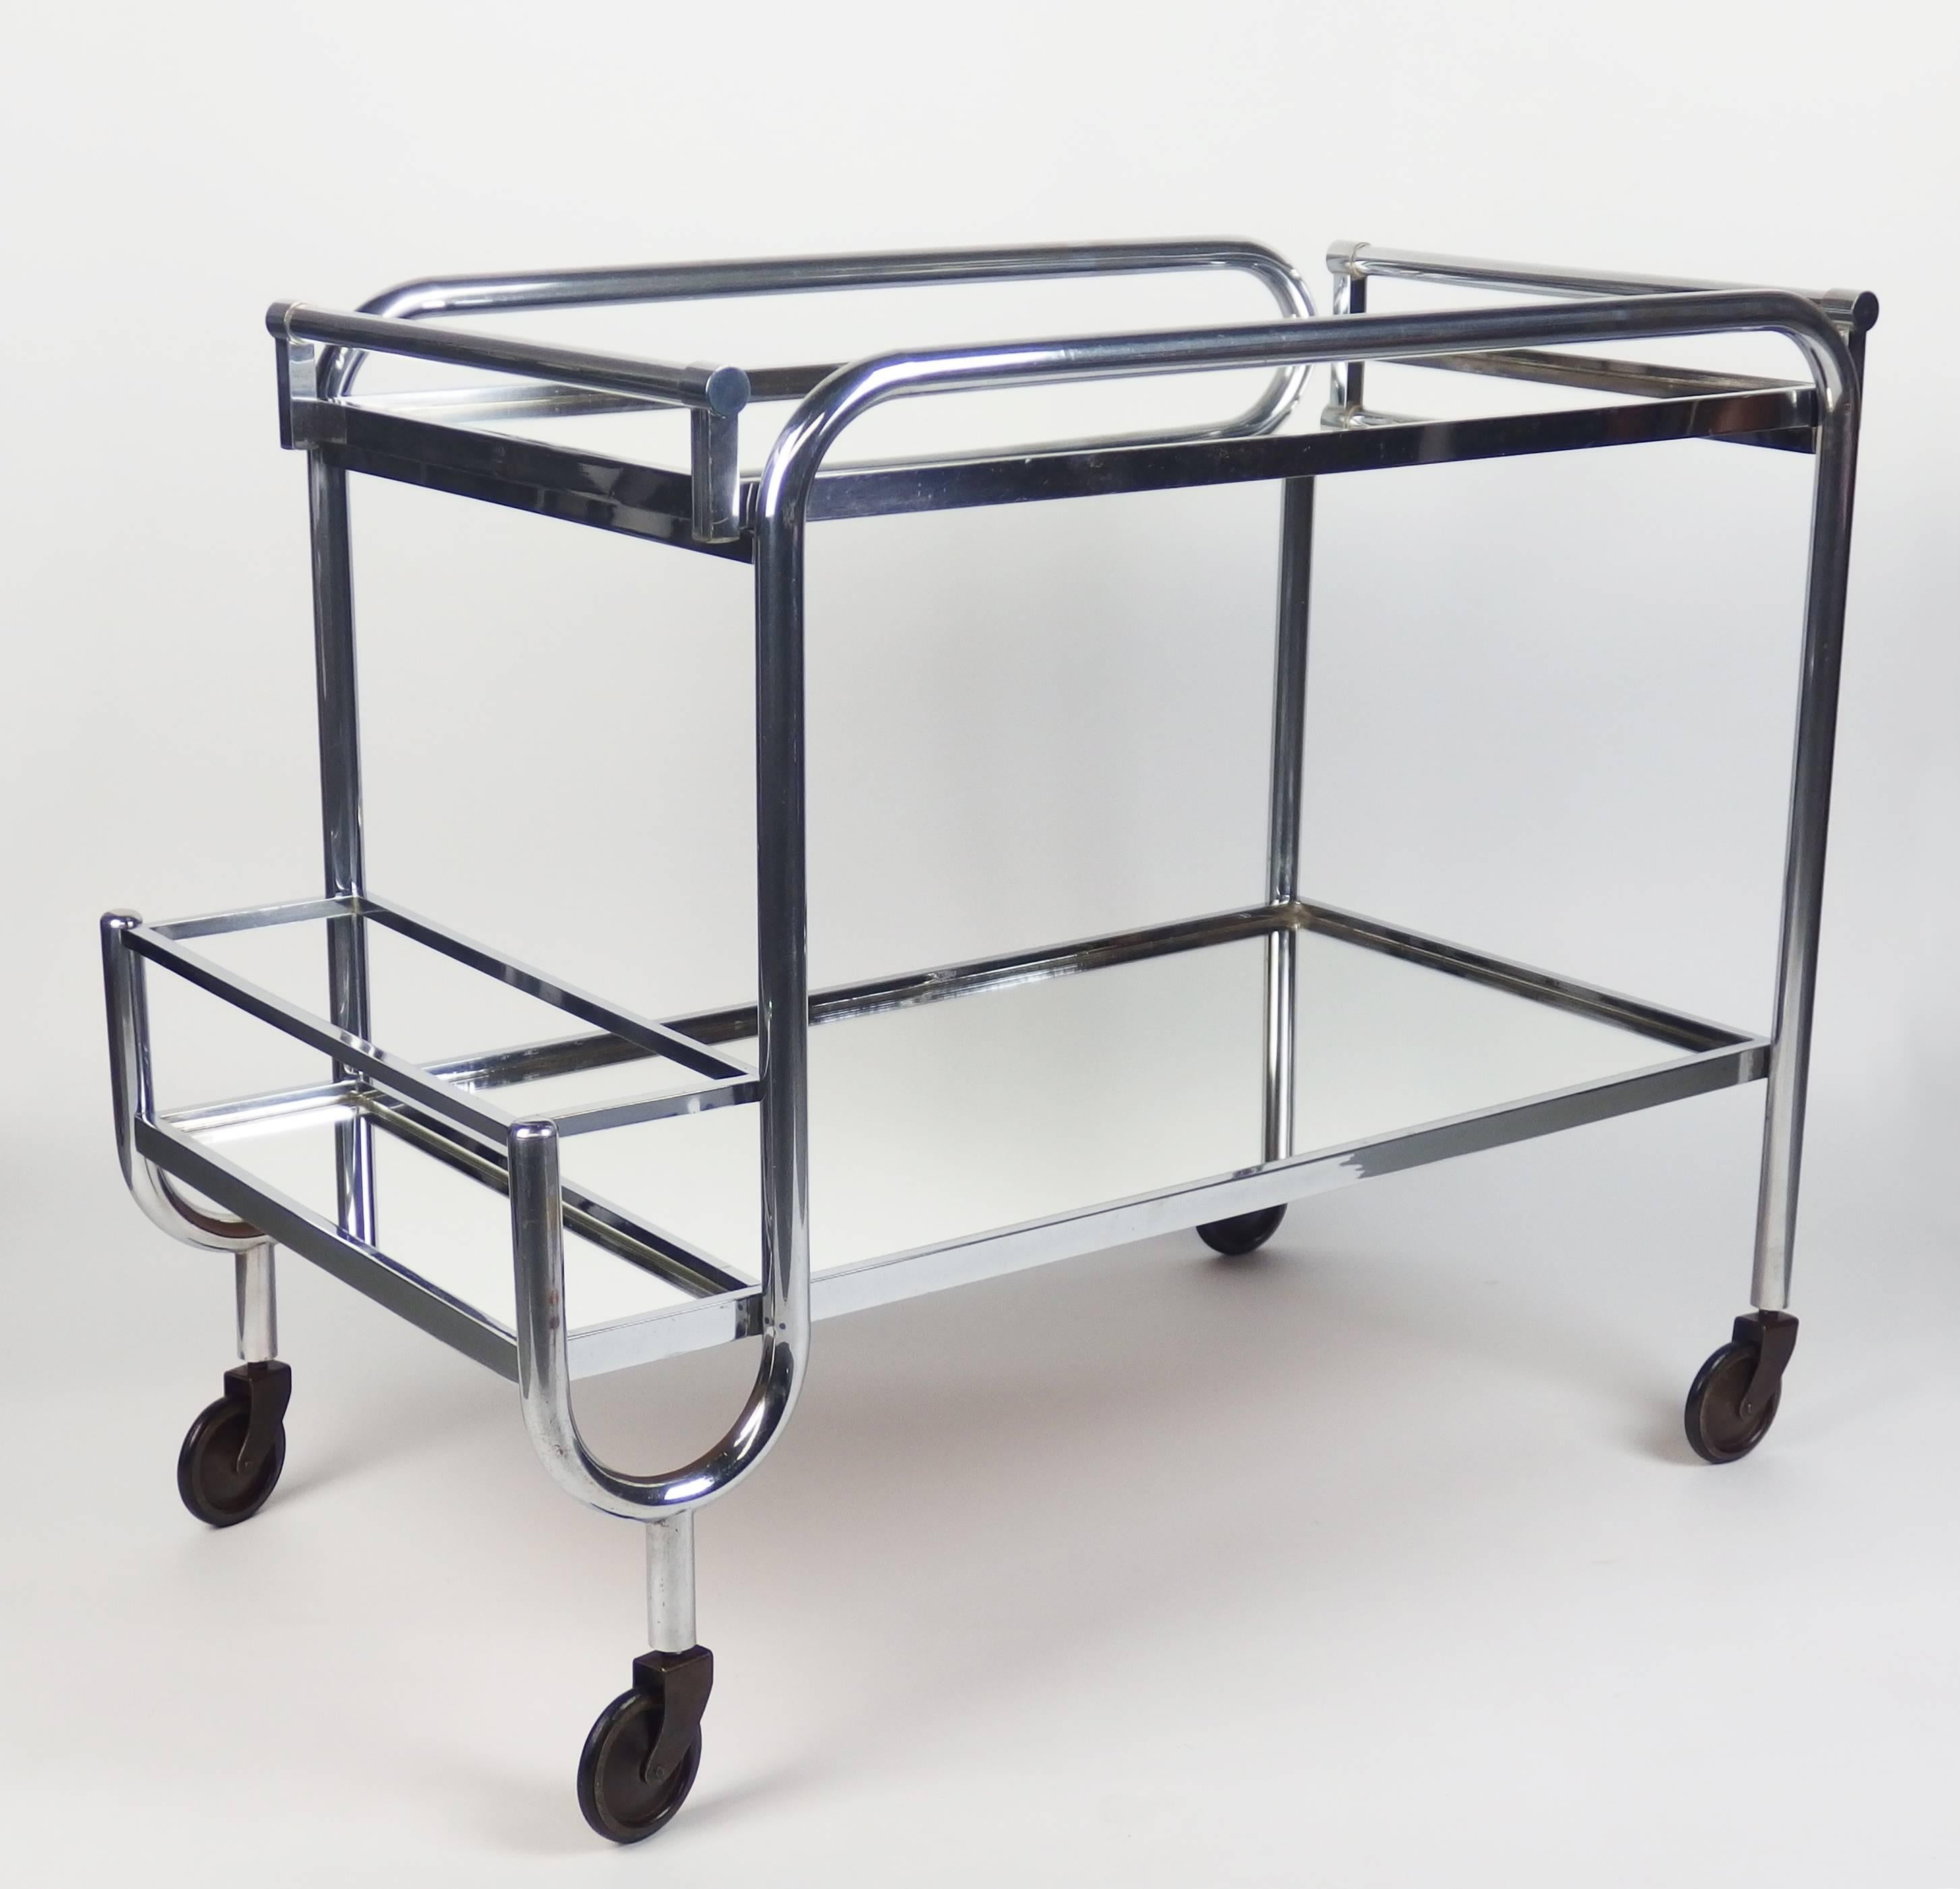 A serving bar cart in chrome and mirror with a removable serving tray.